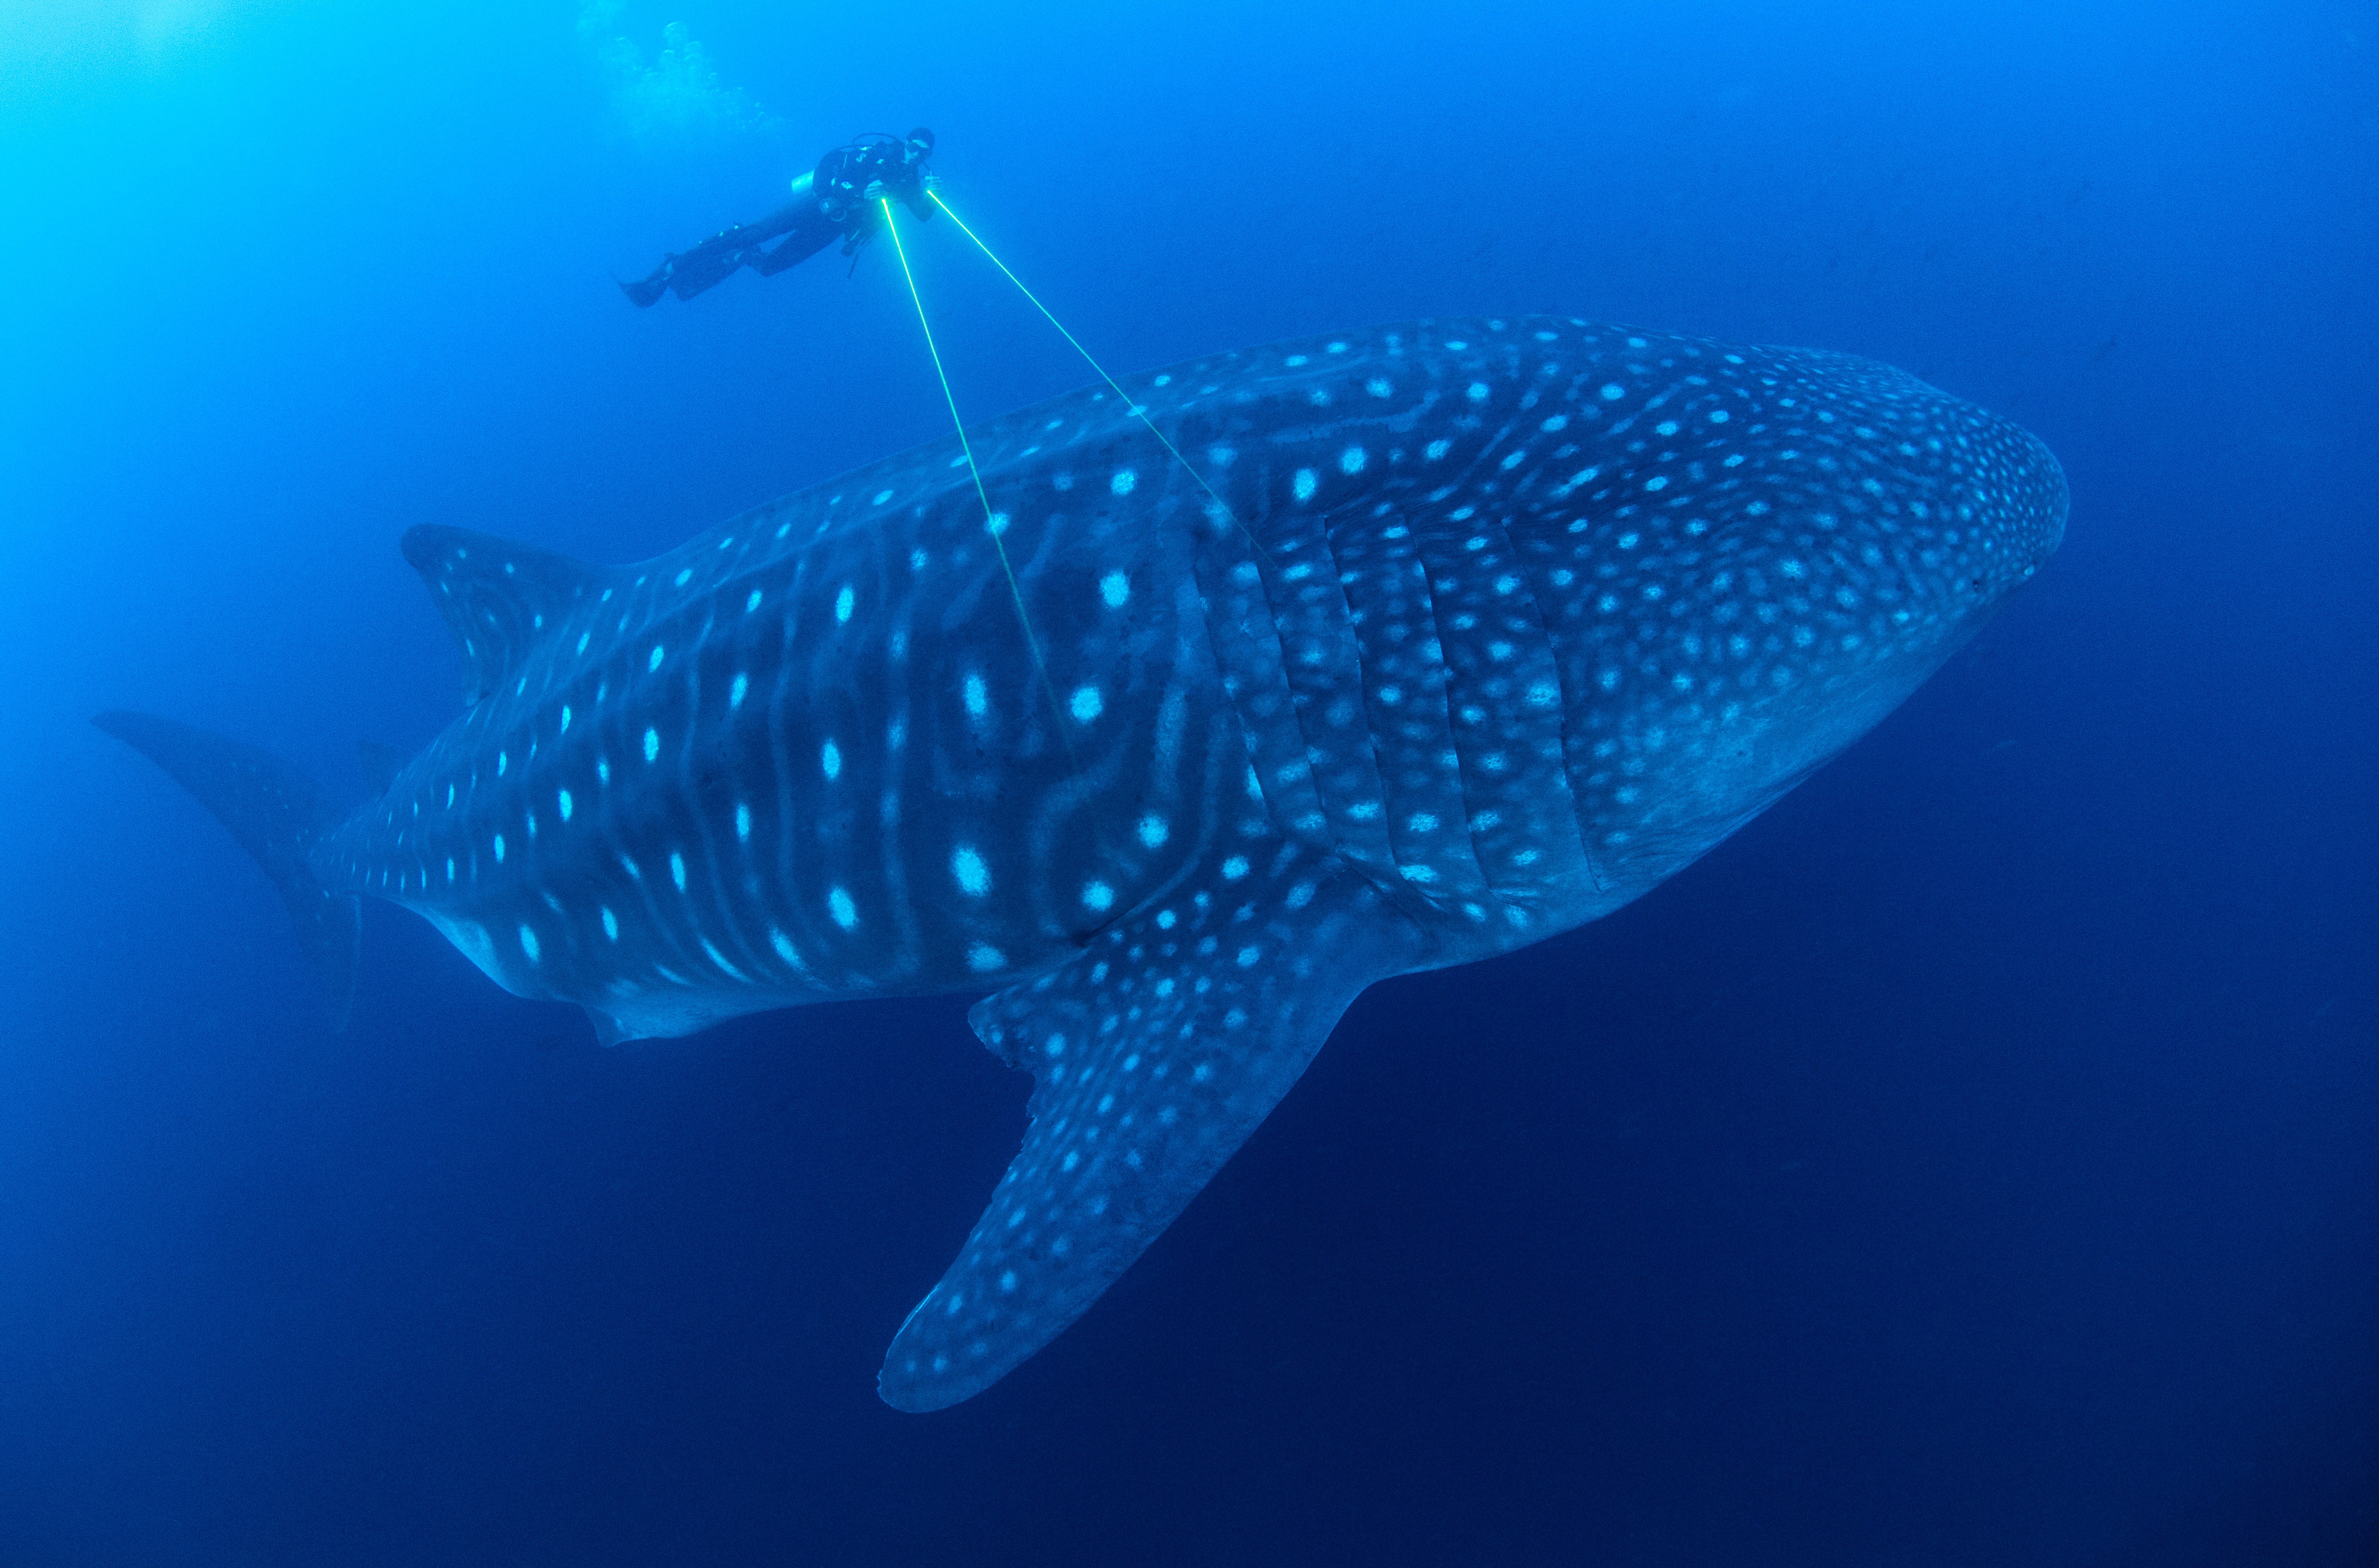 A scientist uses lasers to measure a whale shark in a still from BBC’s Blue Planet II. Photo: courtesy of Blue Planet II